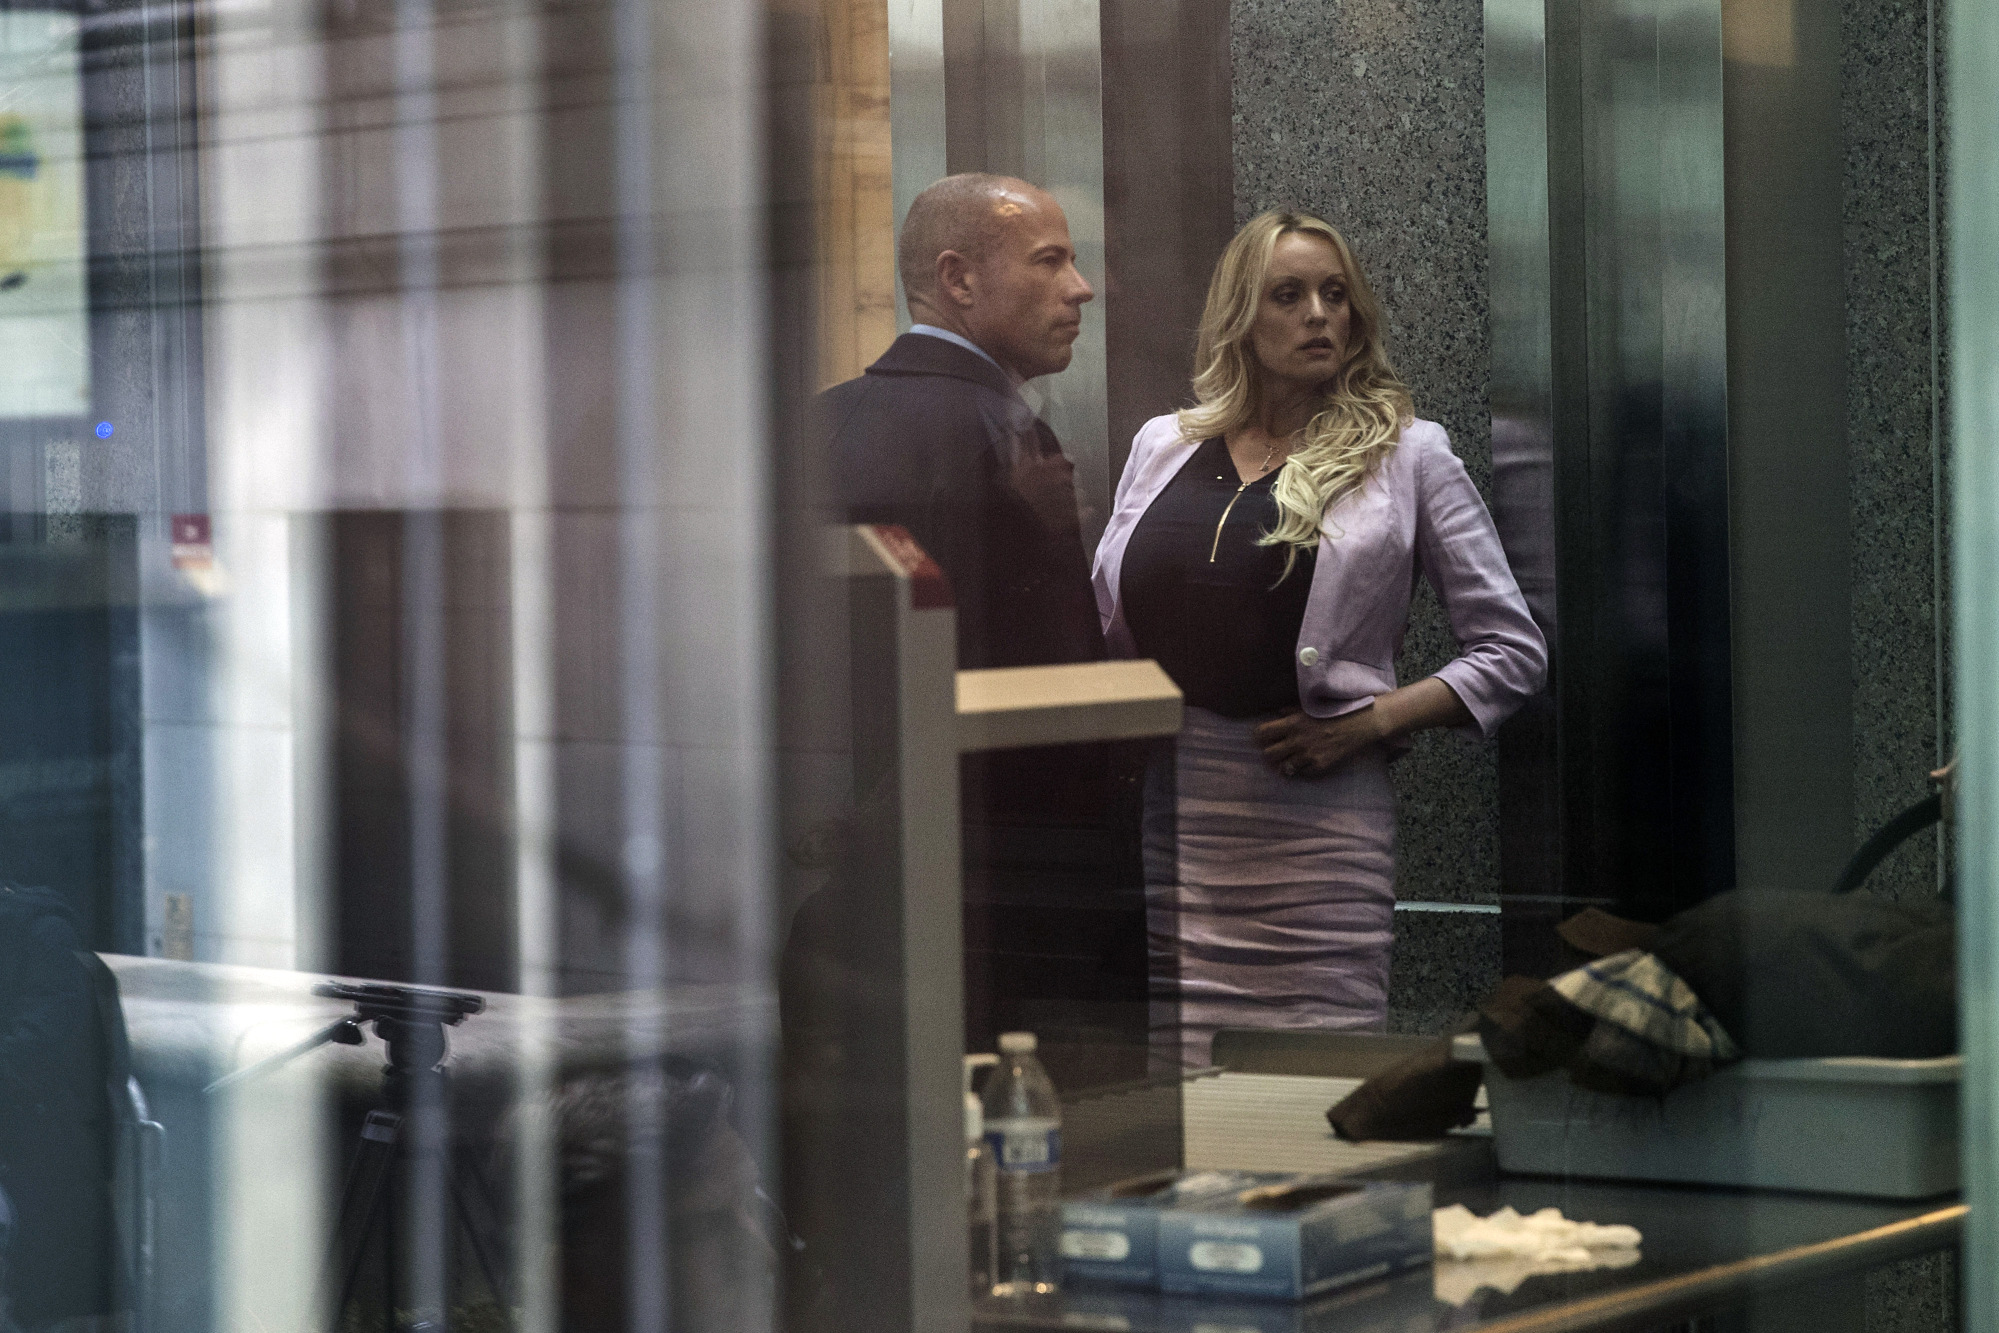 Stormy Daniels and attorney Michael Avenatti&nbsp;at Federal Court in New York, on&nbsp;April 16, 2018.